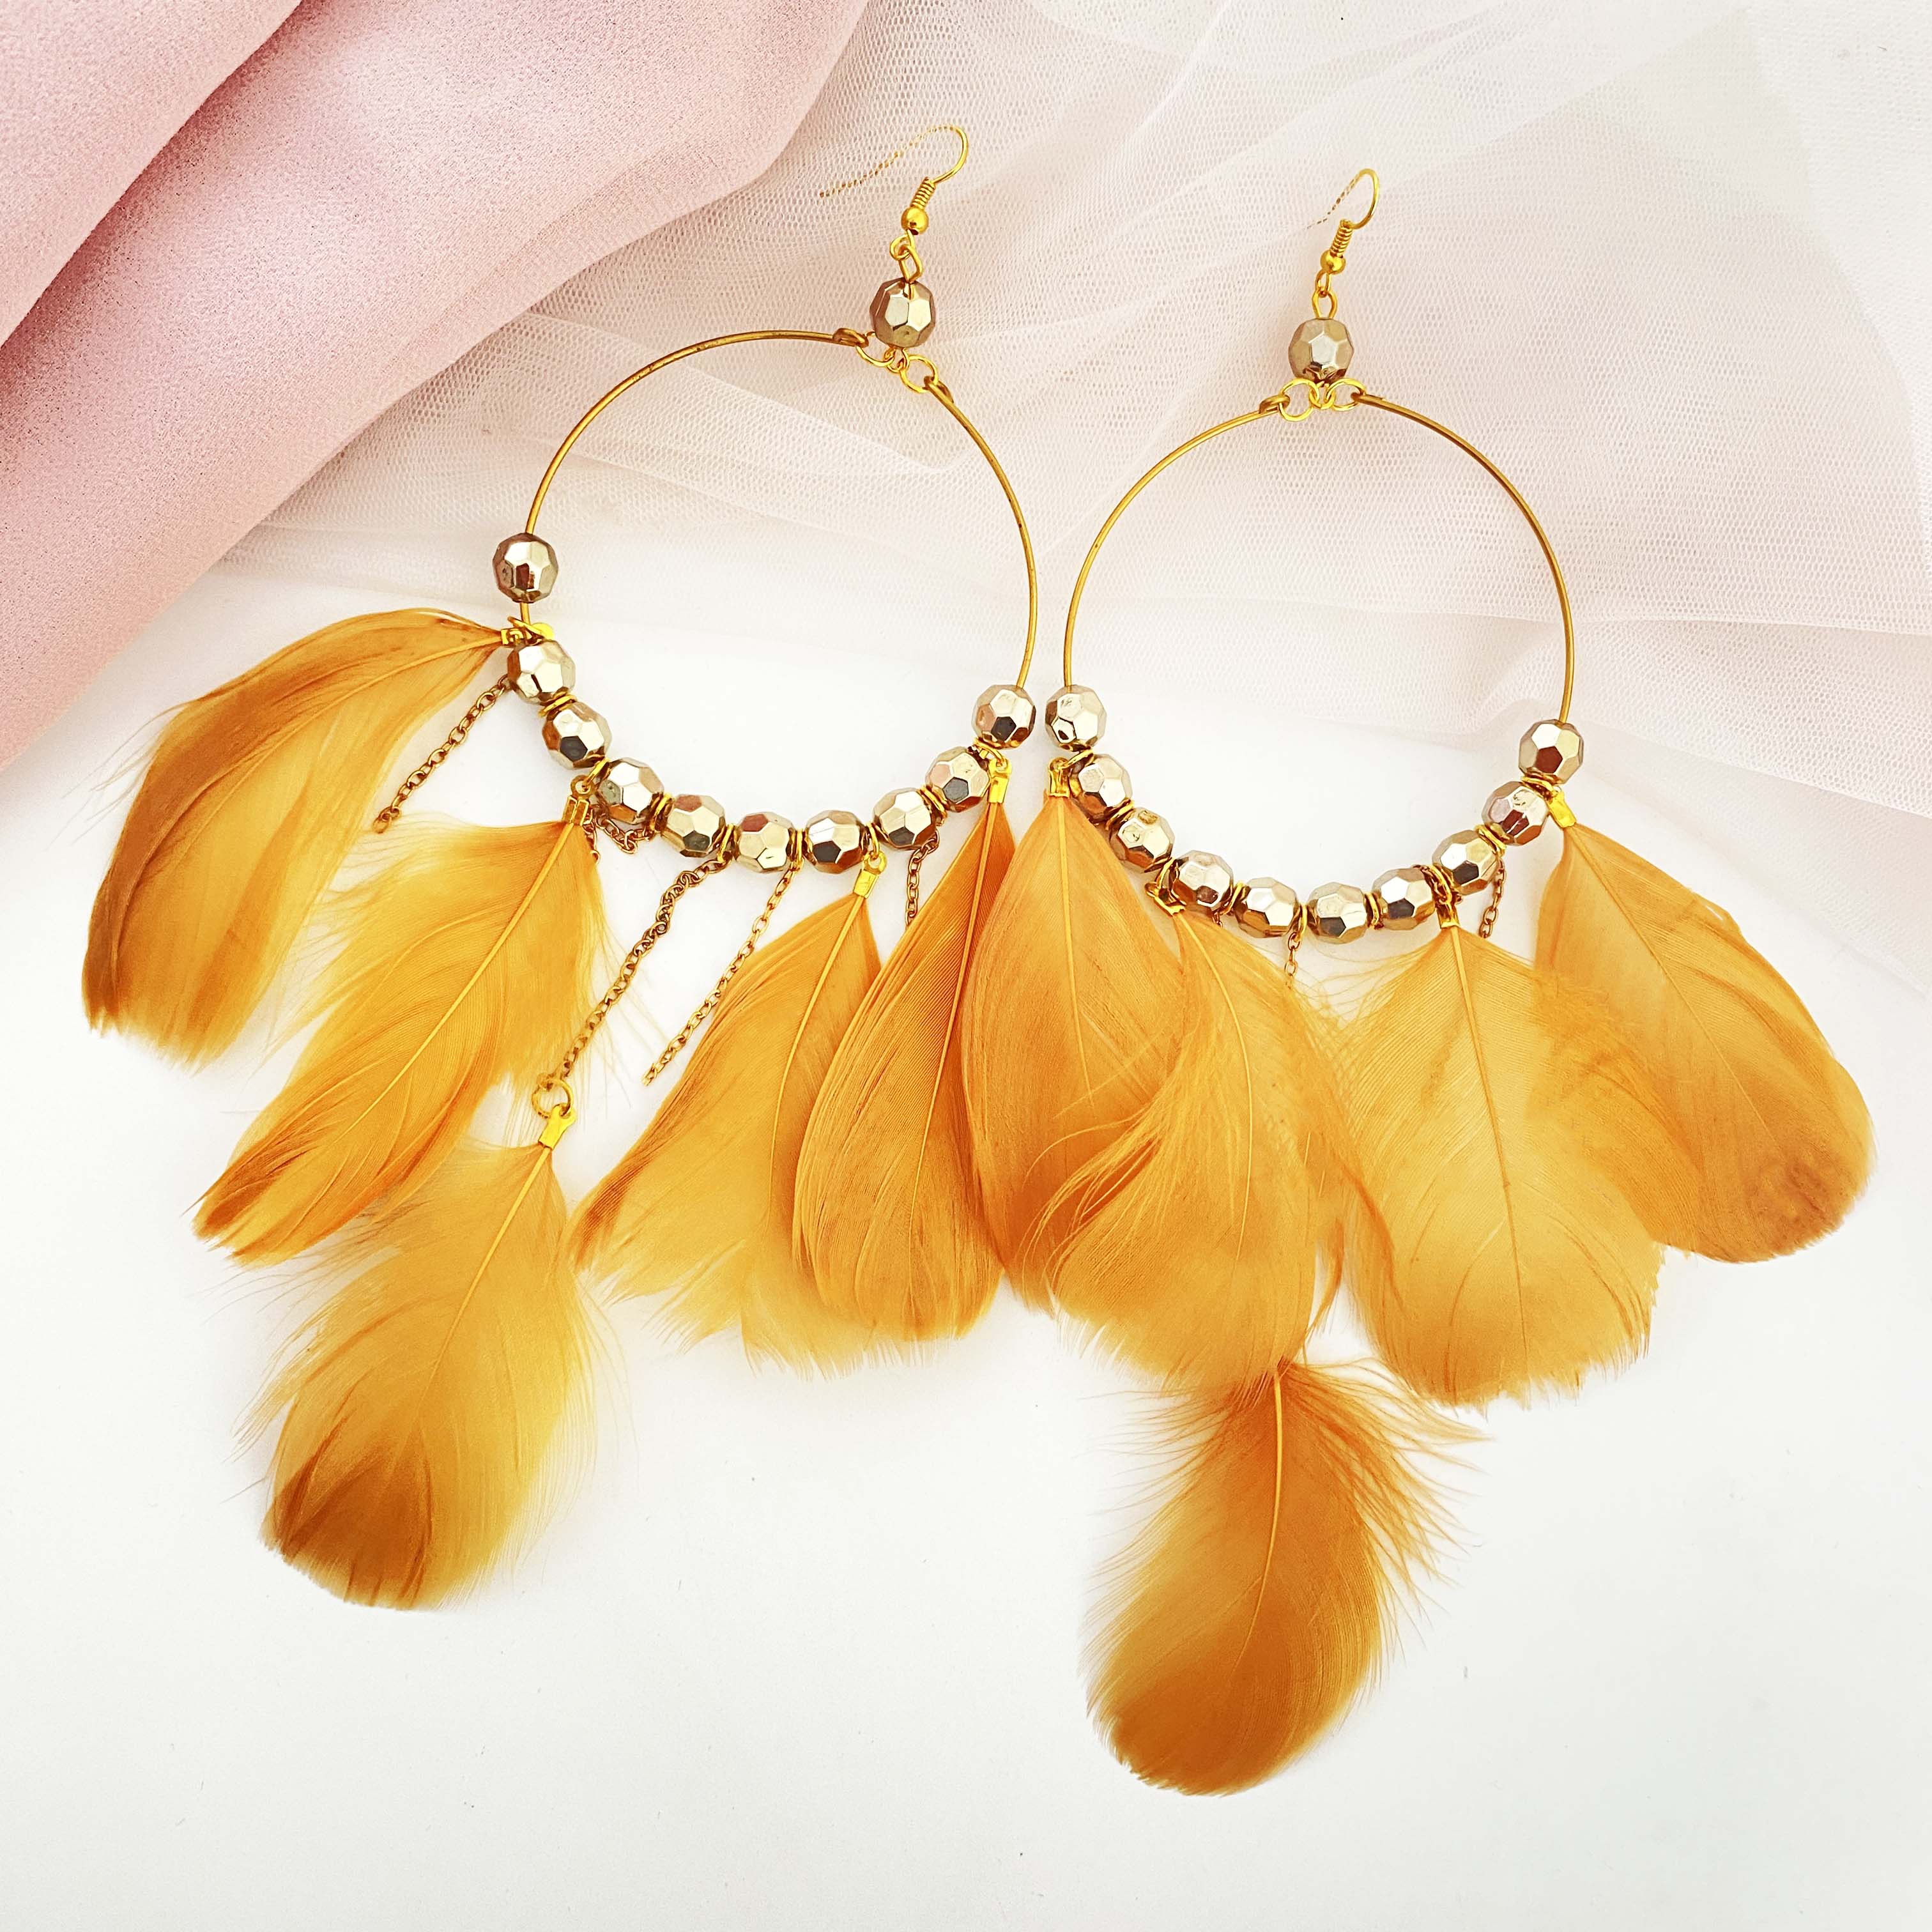 Boho Fiesta Embroidered Shell Earrings – Krafted with Happiness